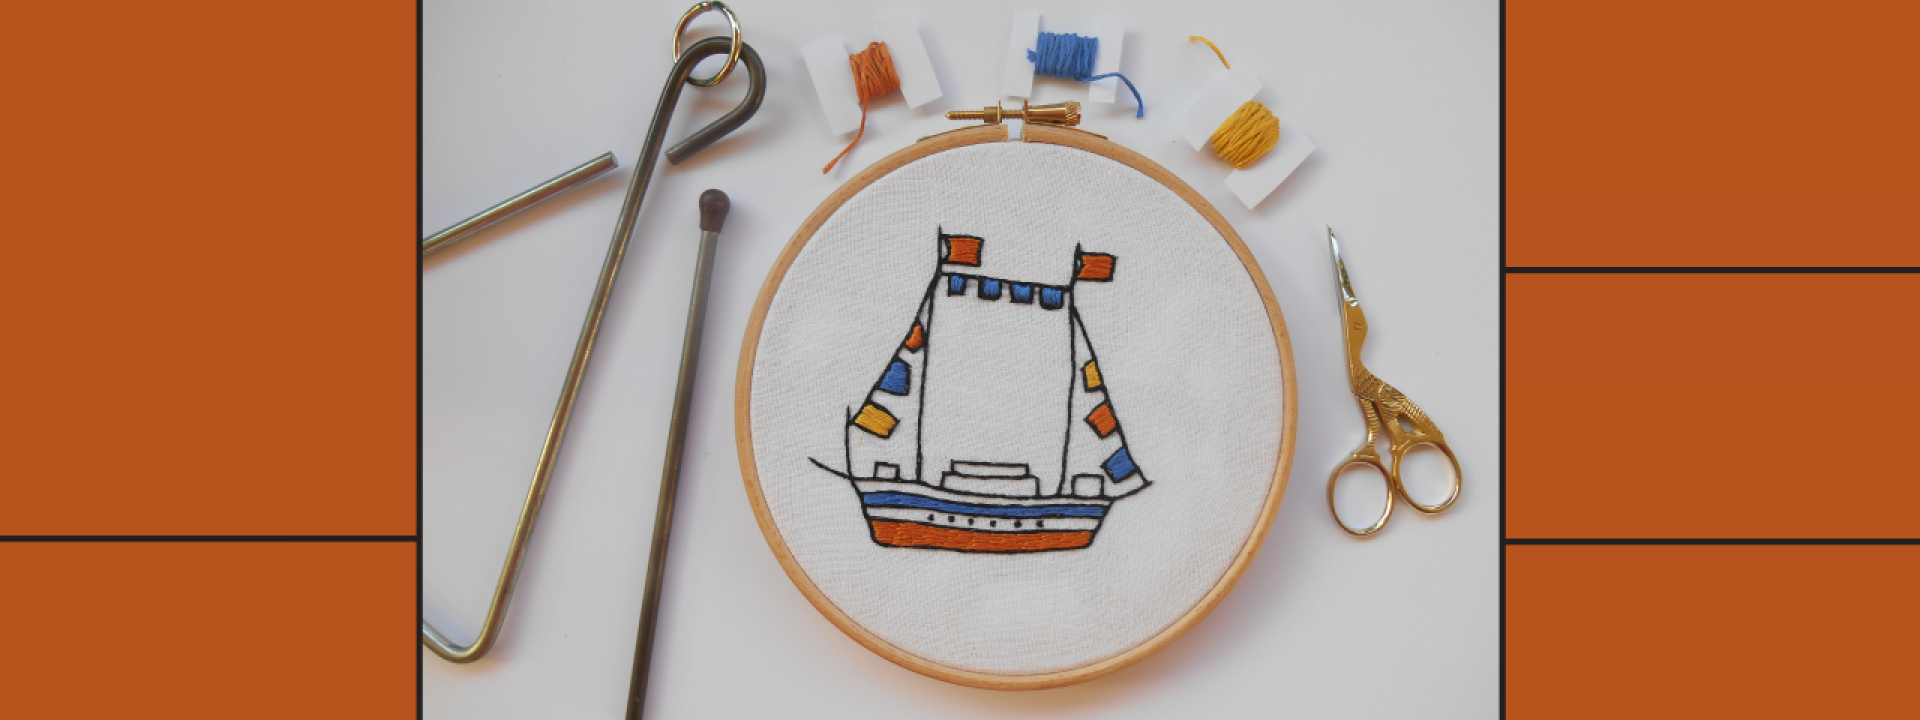 Members Events: Creative Embroidery | Christmas stitches at the SNFCC - Εικόνα